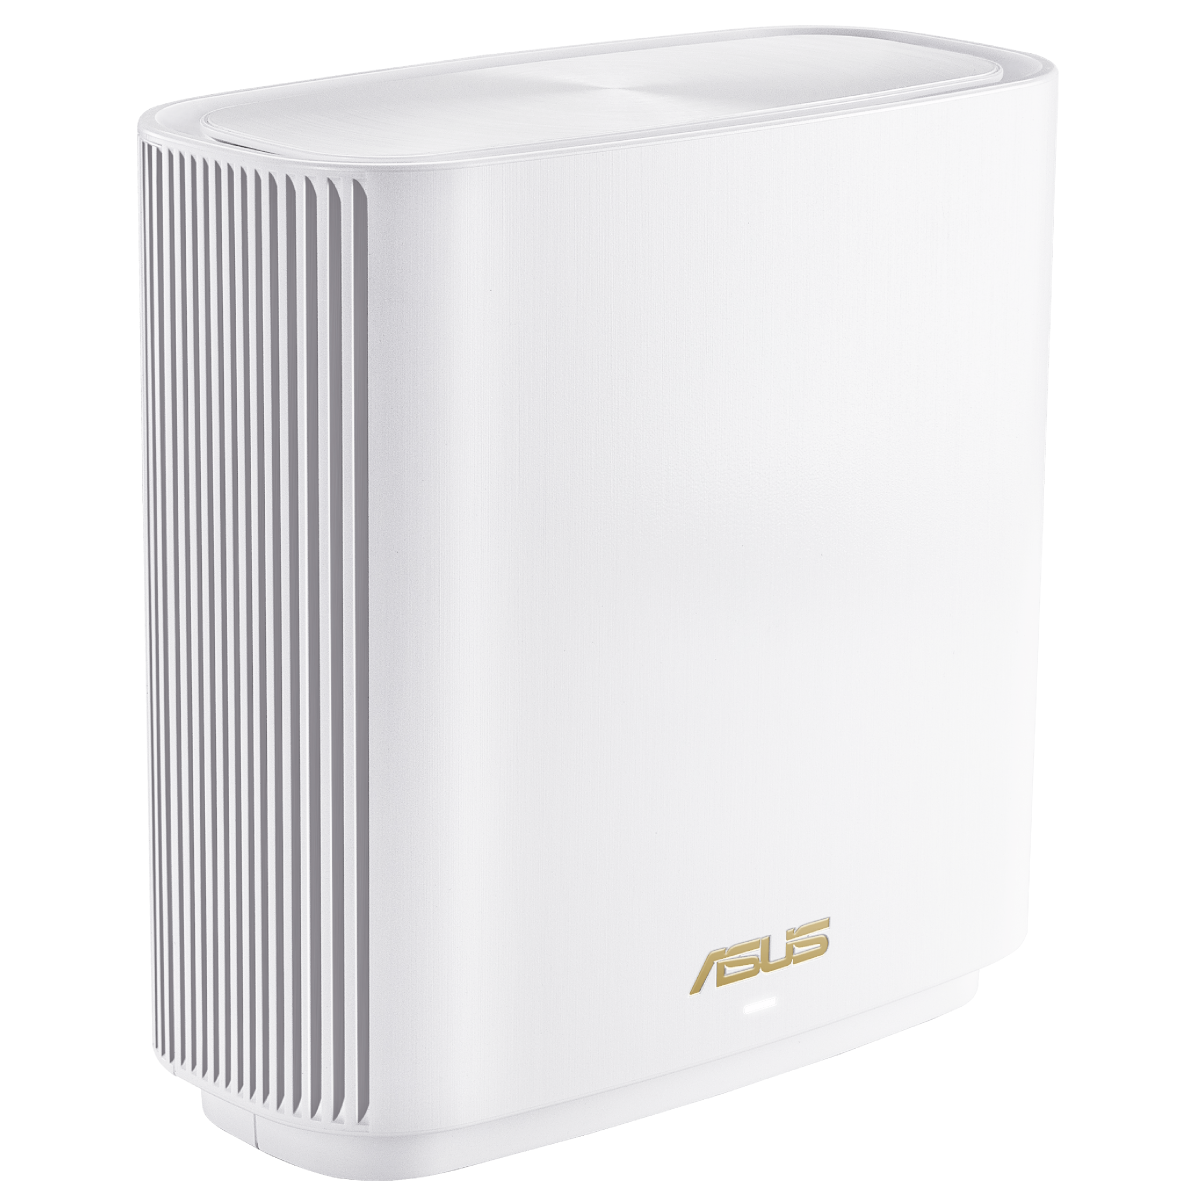 Asus - B Grade ASUS ZenWifi AX (XT8) AX6600 WiFi 6 Mesh System Pack of 1 - White